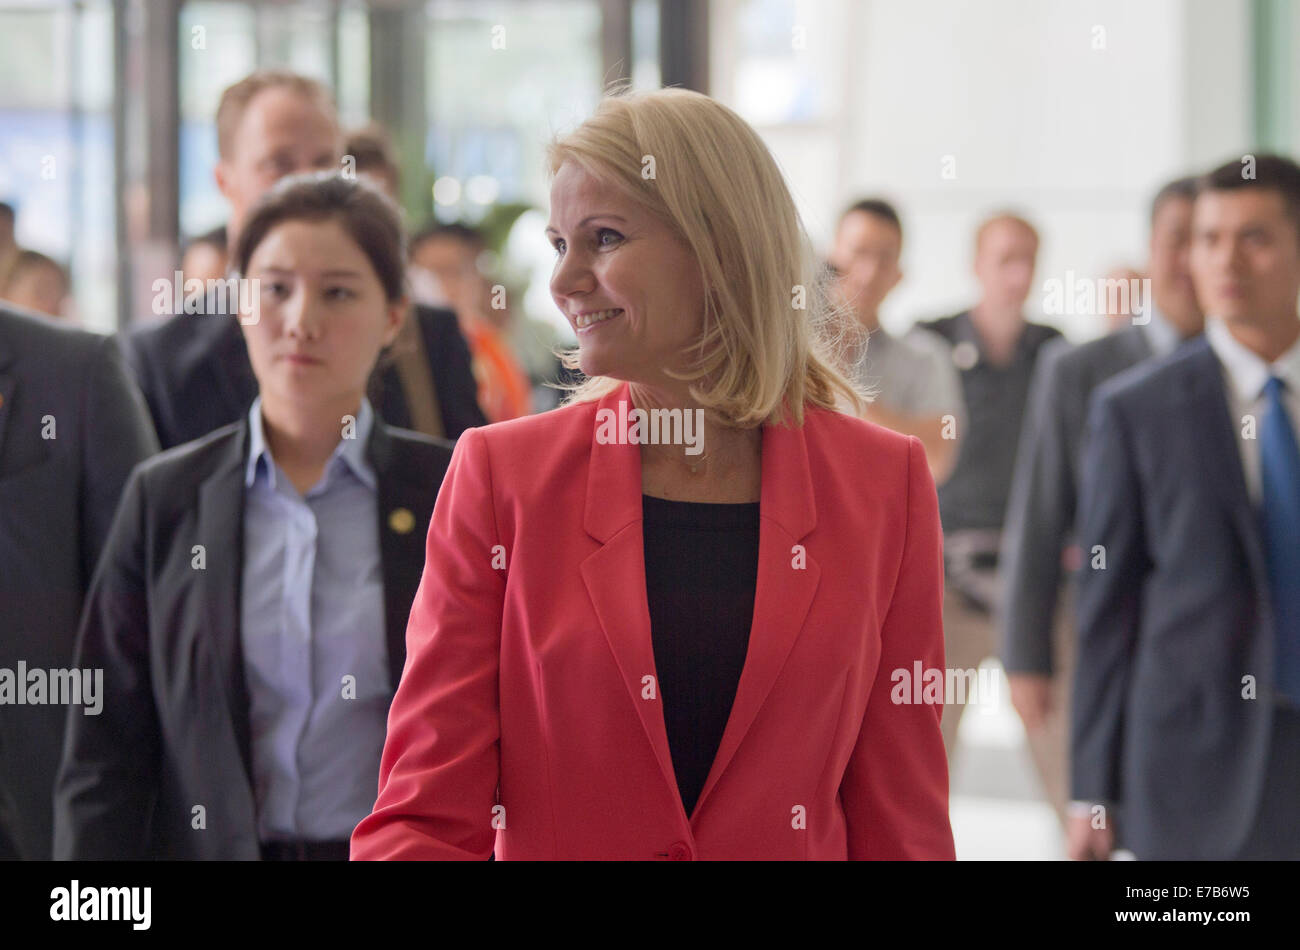 Beijing, China. 11th Sep, 2014. The Danish Prime Minister Helle Thorning-Schmidt visiting Sina Media Corporation where she was taking questions from Chinese netizens online through Weibo. © Time-Snaps Stock Photo